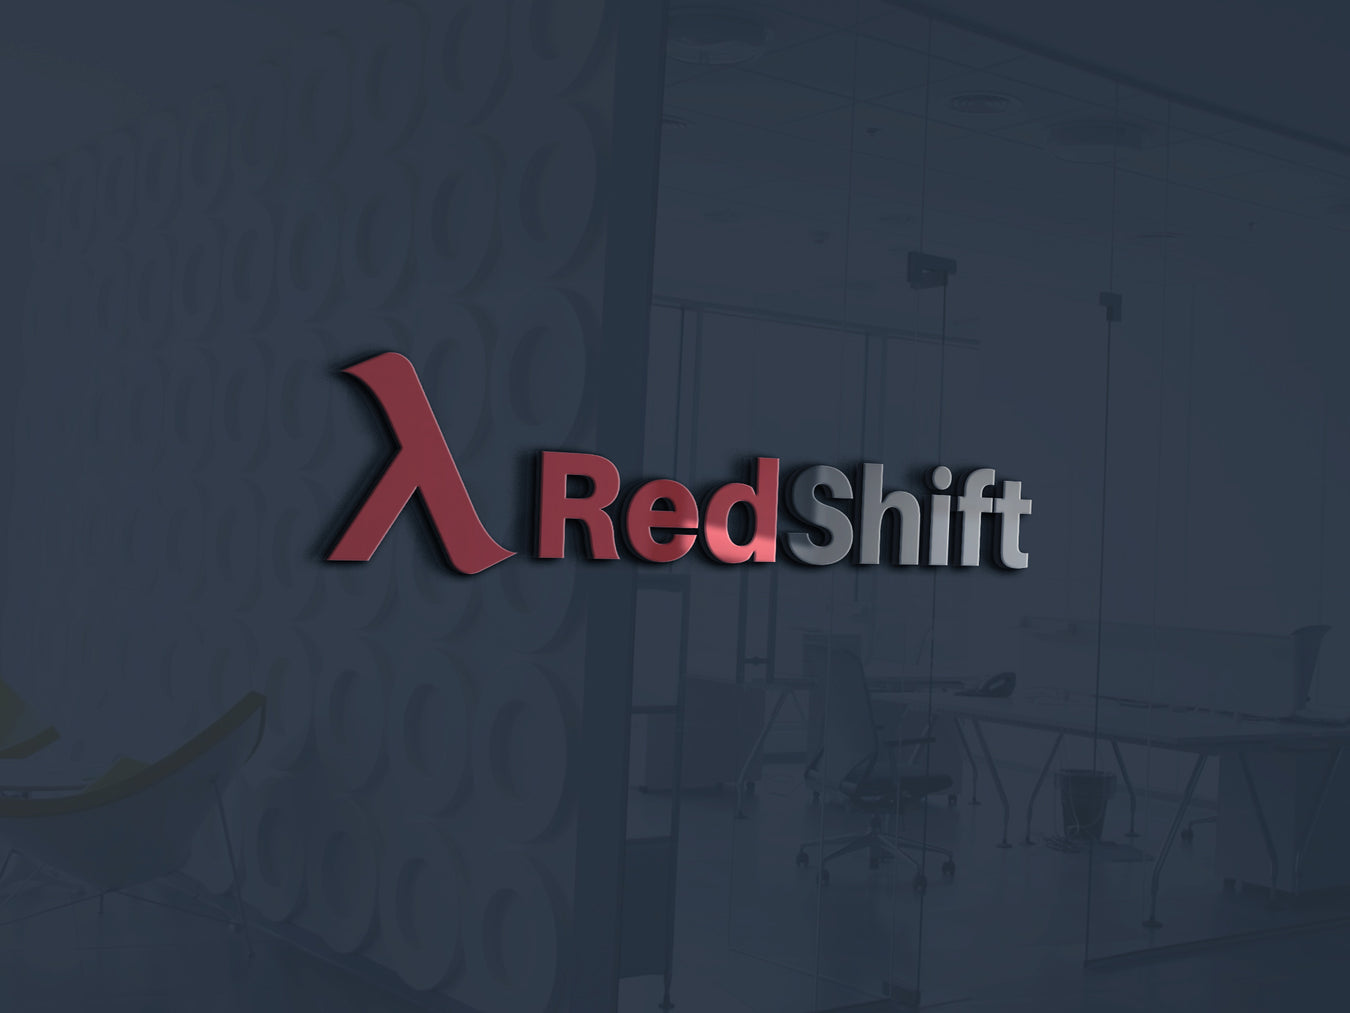 RedShift - Red Light Therapy